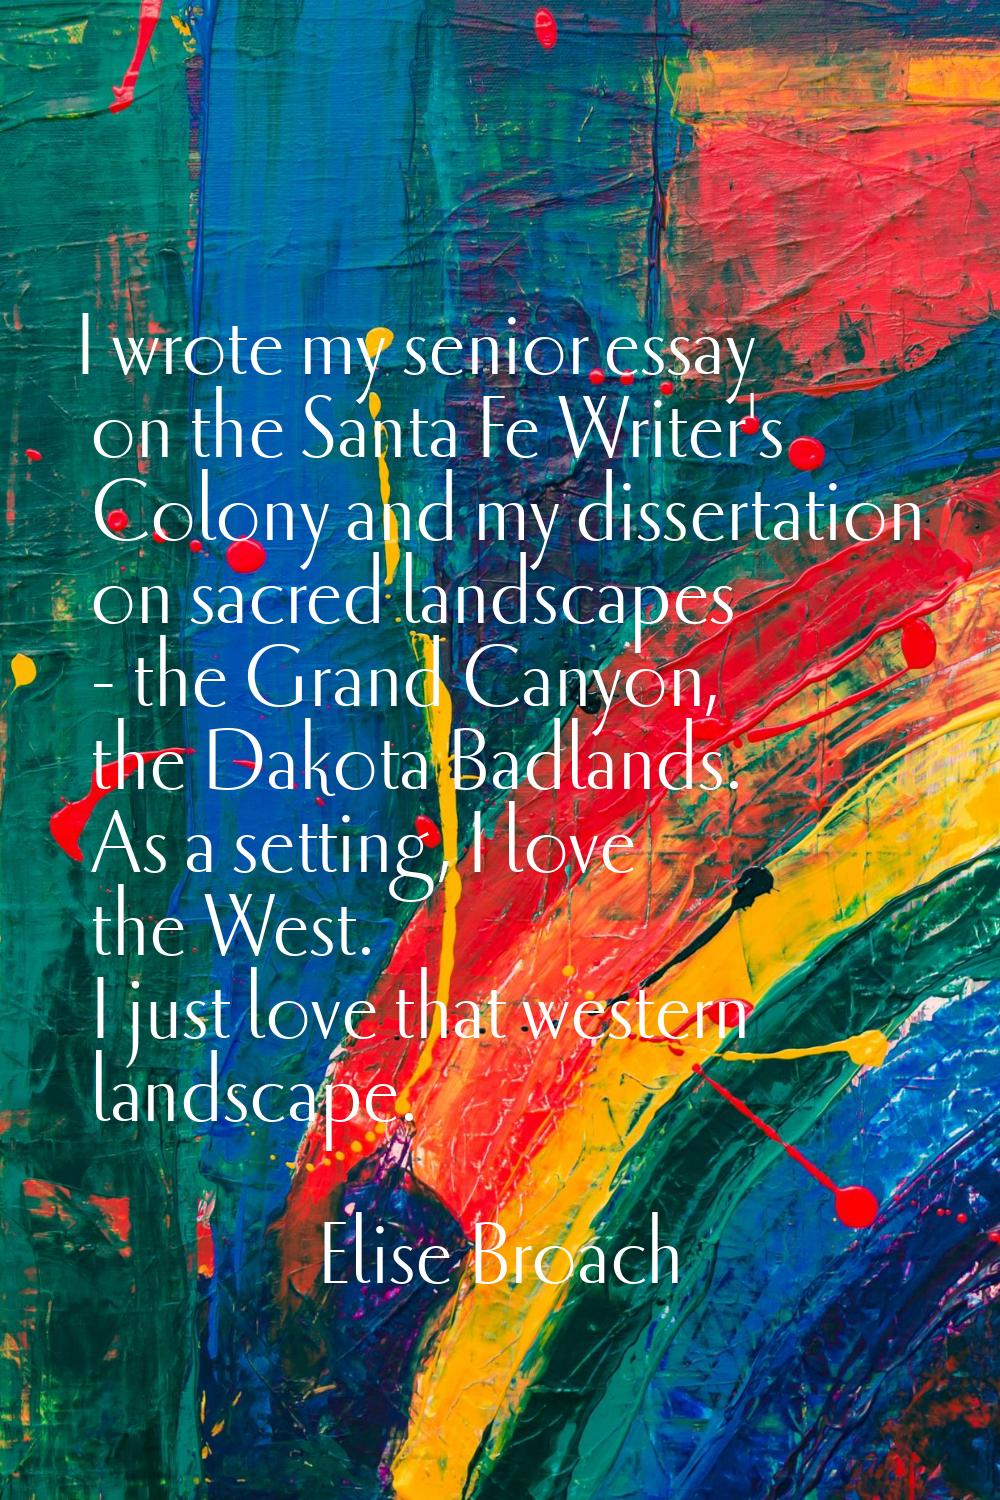 I wrote my senior essay on the Santa Fe Writer's Colony and my dissertation on sacred landscapes - 